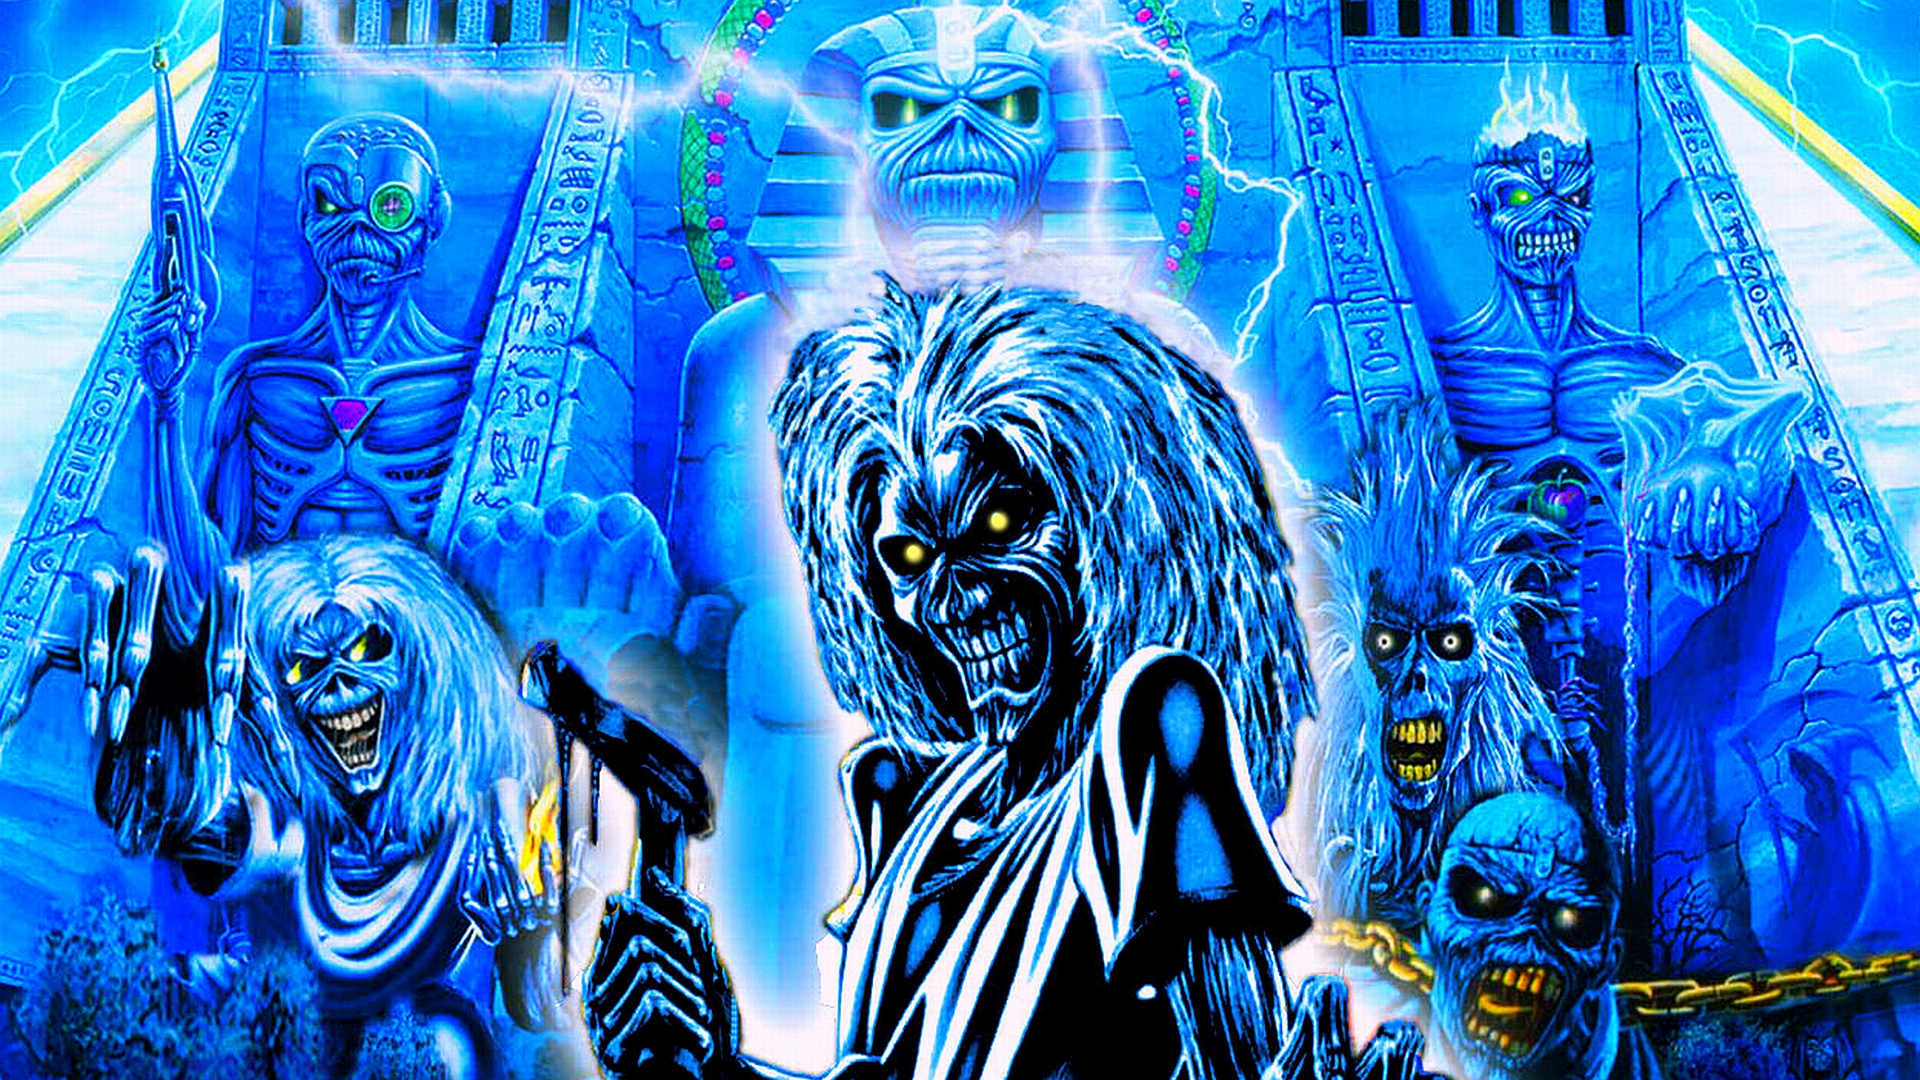 Iron Maiden Hd Wallpapers